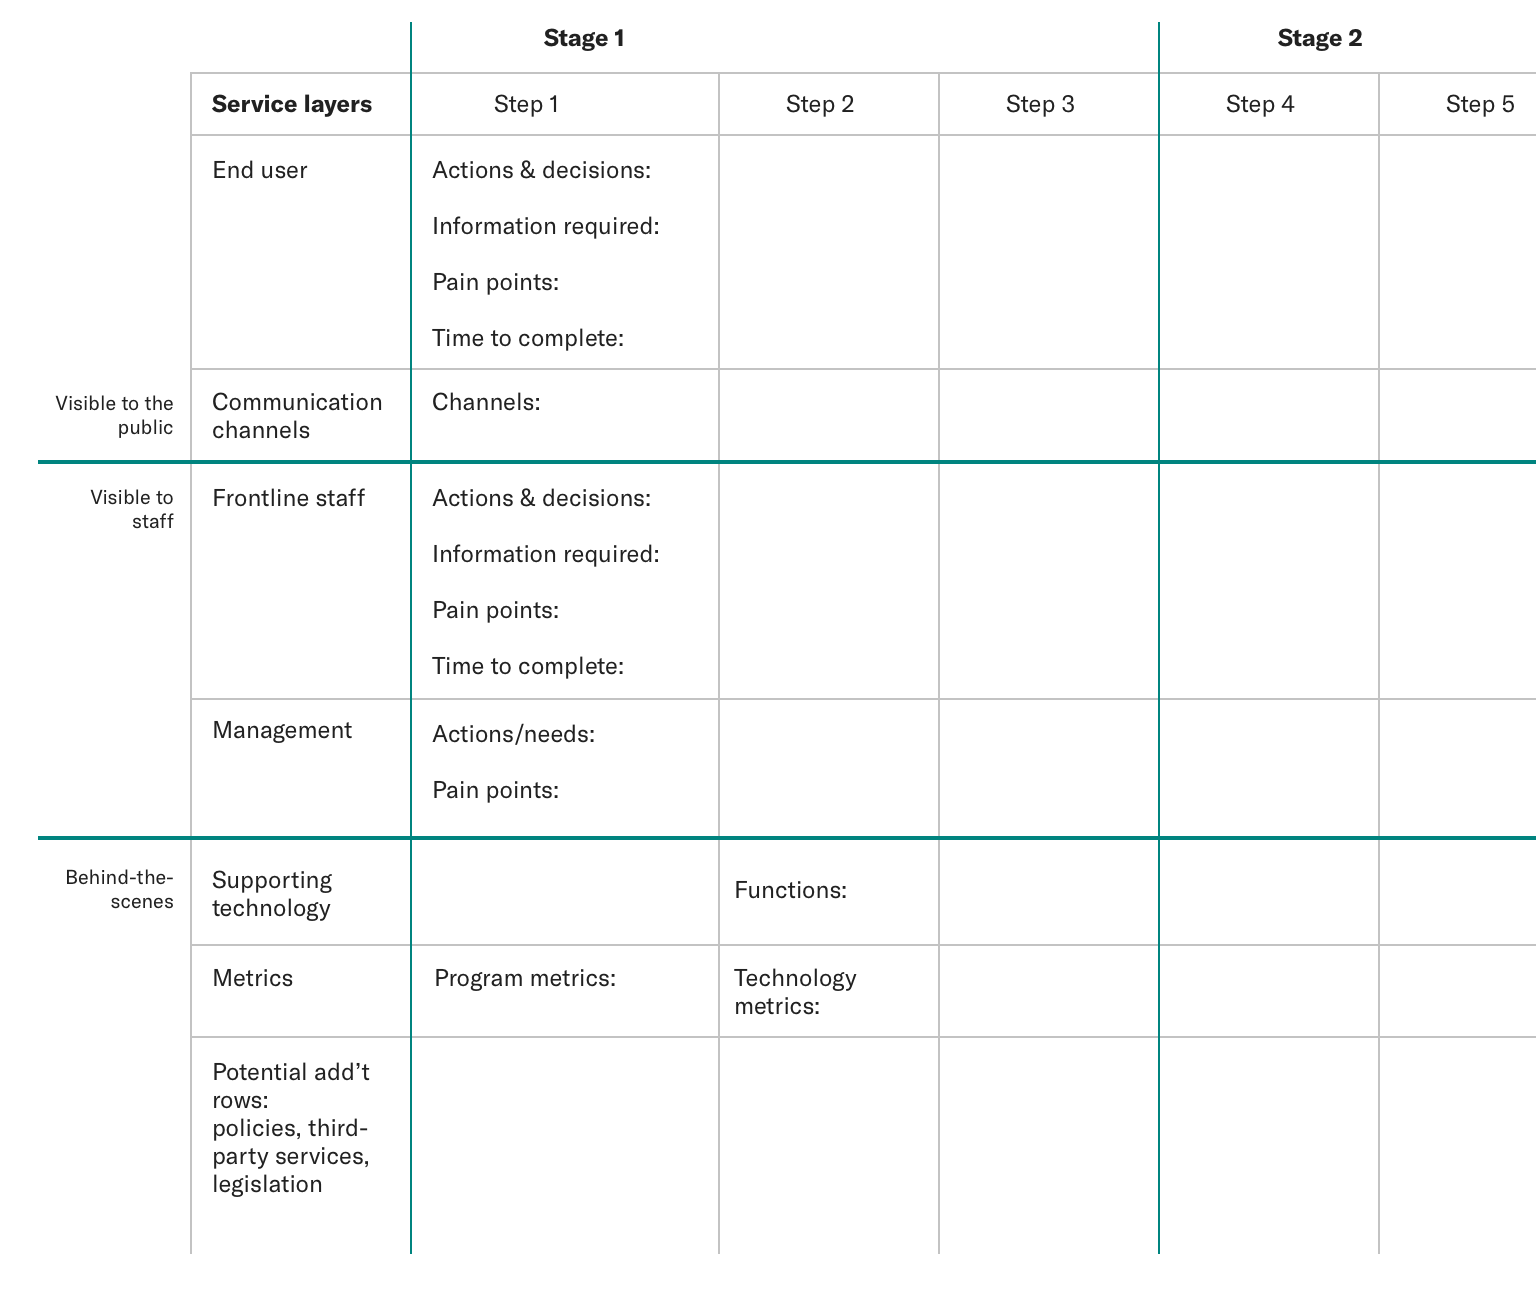 A basic example of a service blueprint chart, broken into different stages under the following categories: Visible to the public, Visible to staff, and Behind-the-scenes.